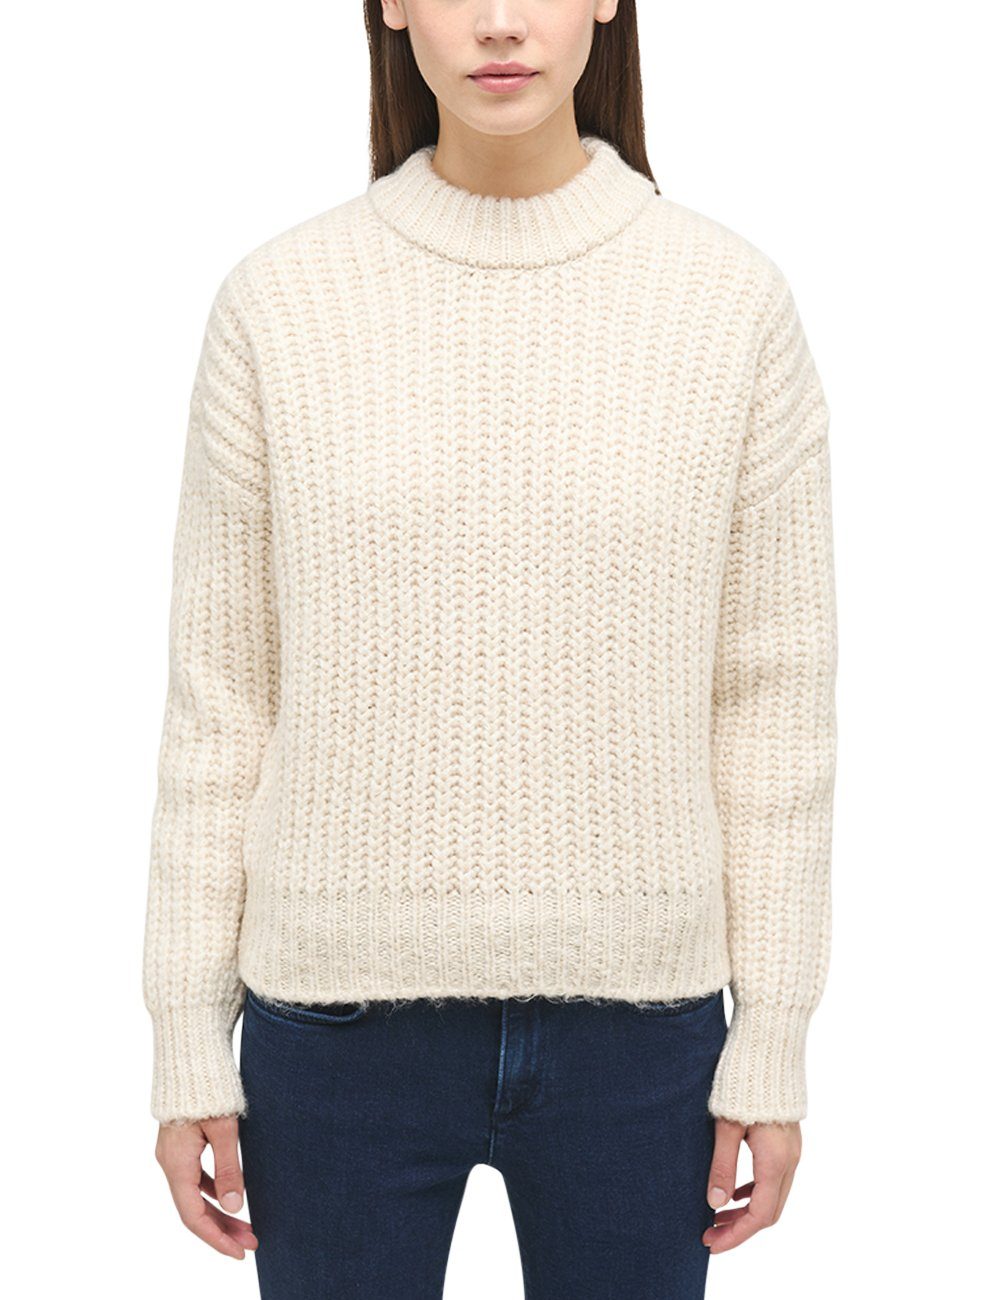 Strickpullover offwhite Mustang MUSTANG Sweater